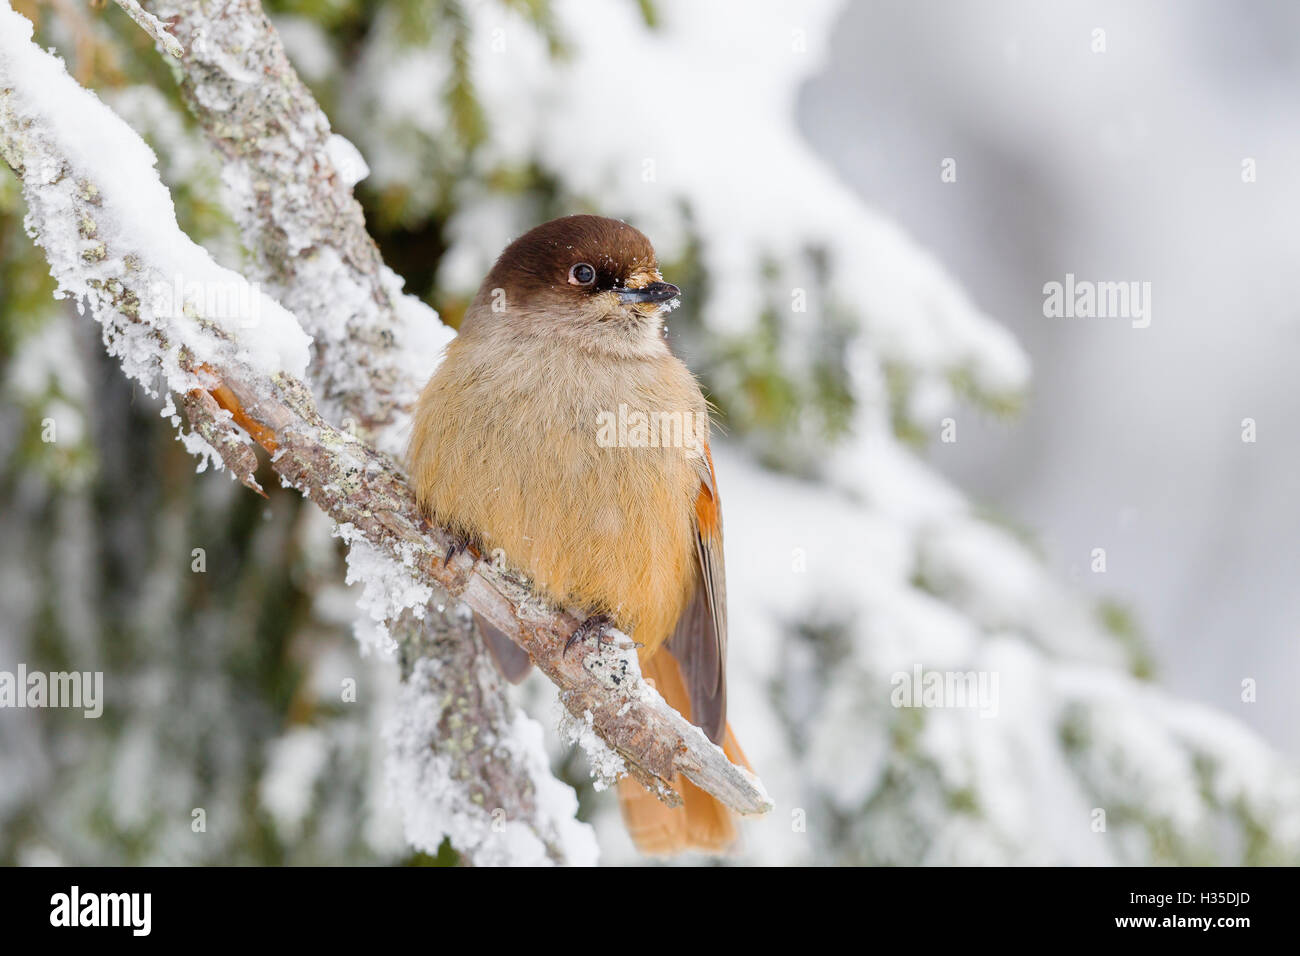 Siberian jay (Perisoreus infaustus), perched on a snow covered branch, Taiga Forest, Finland Stock Photo